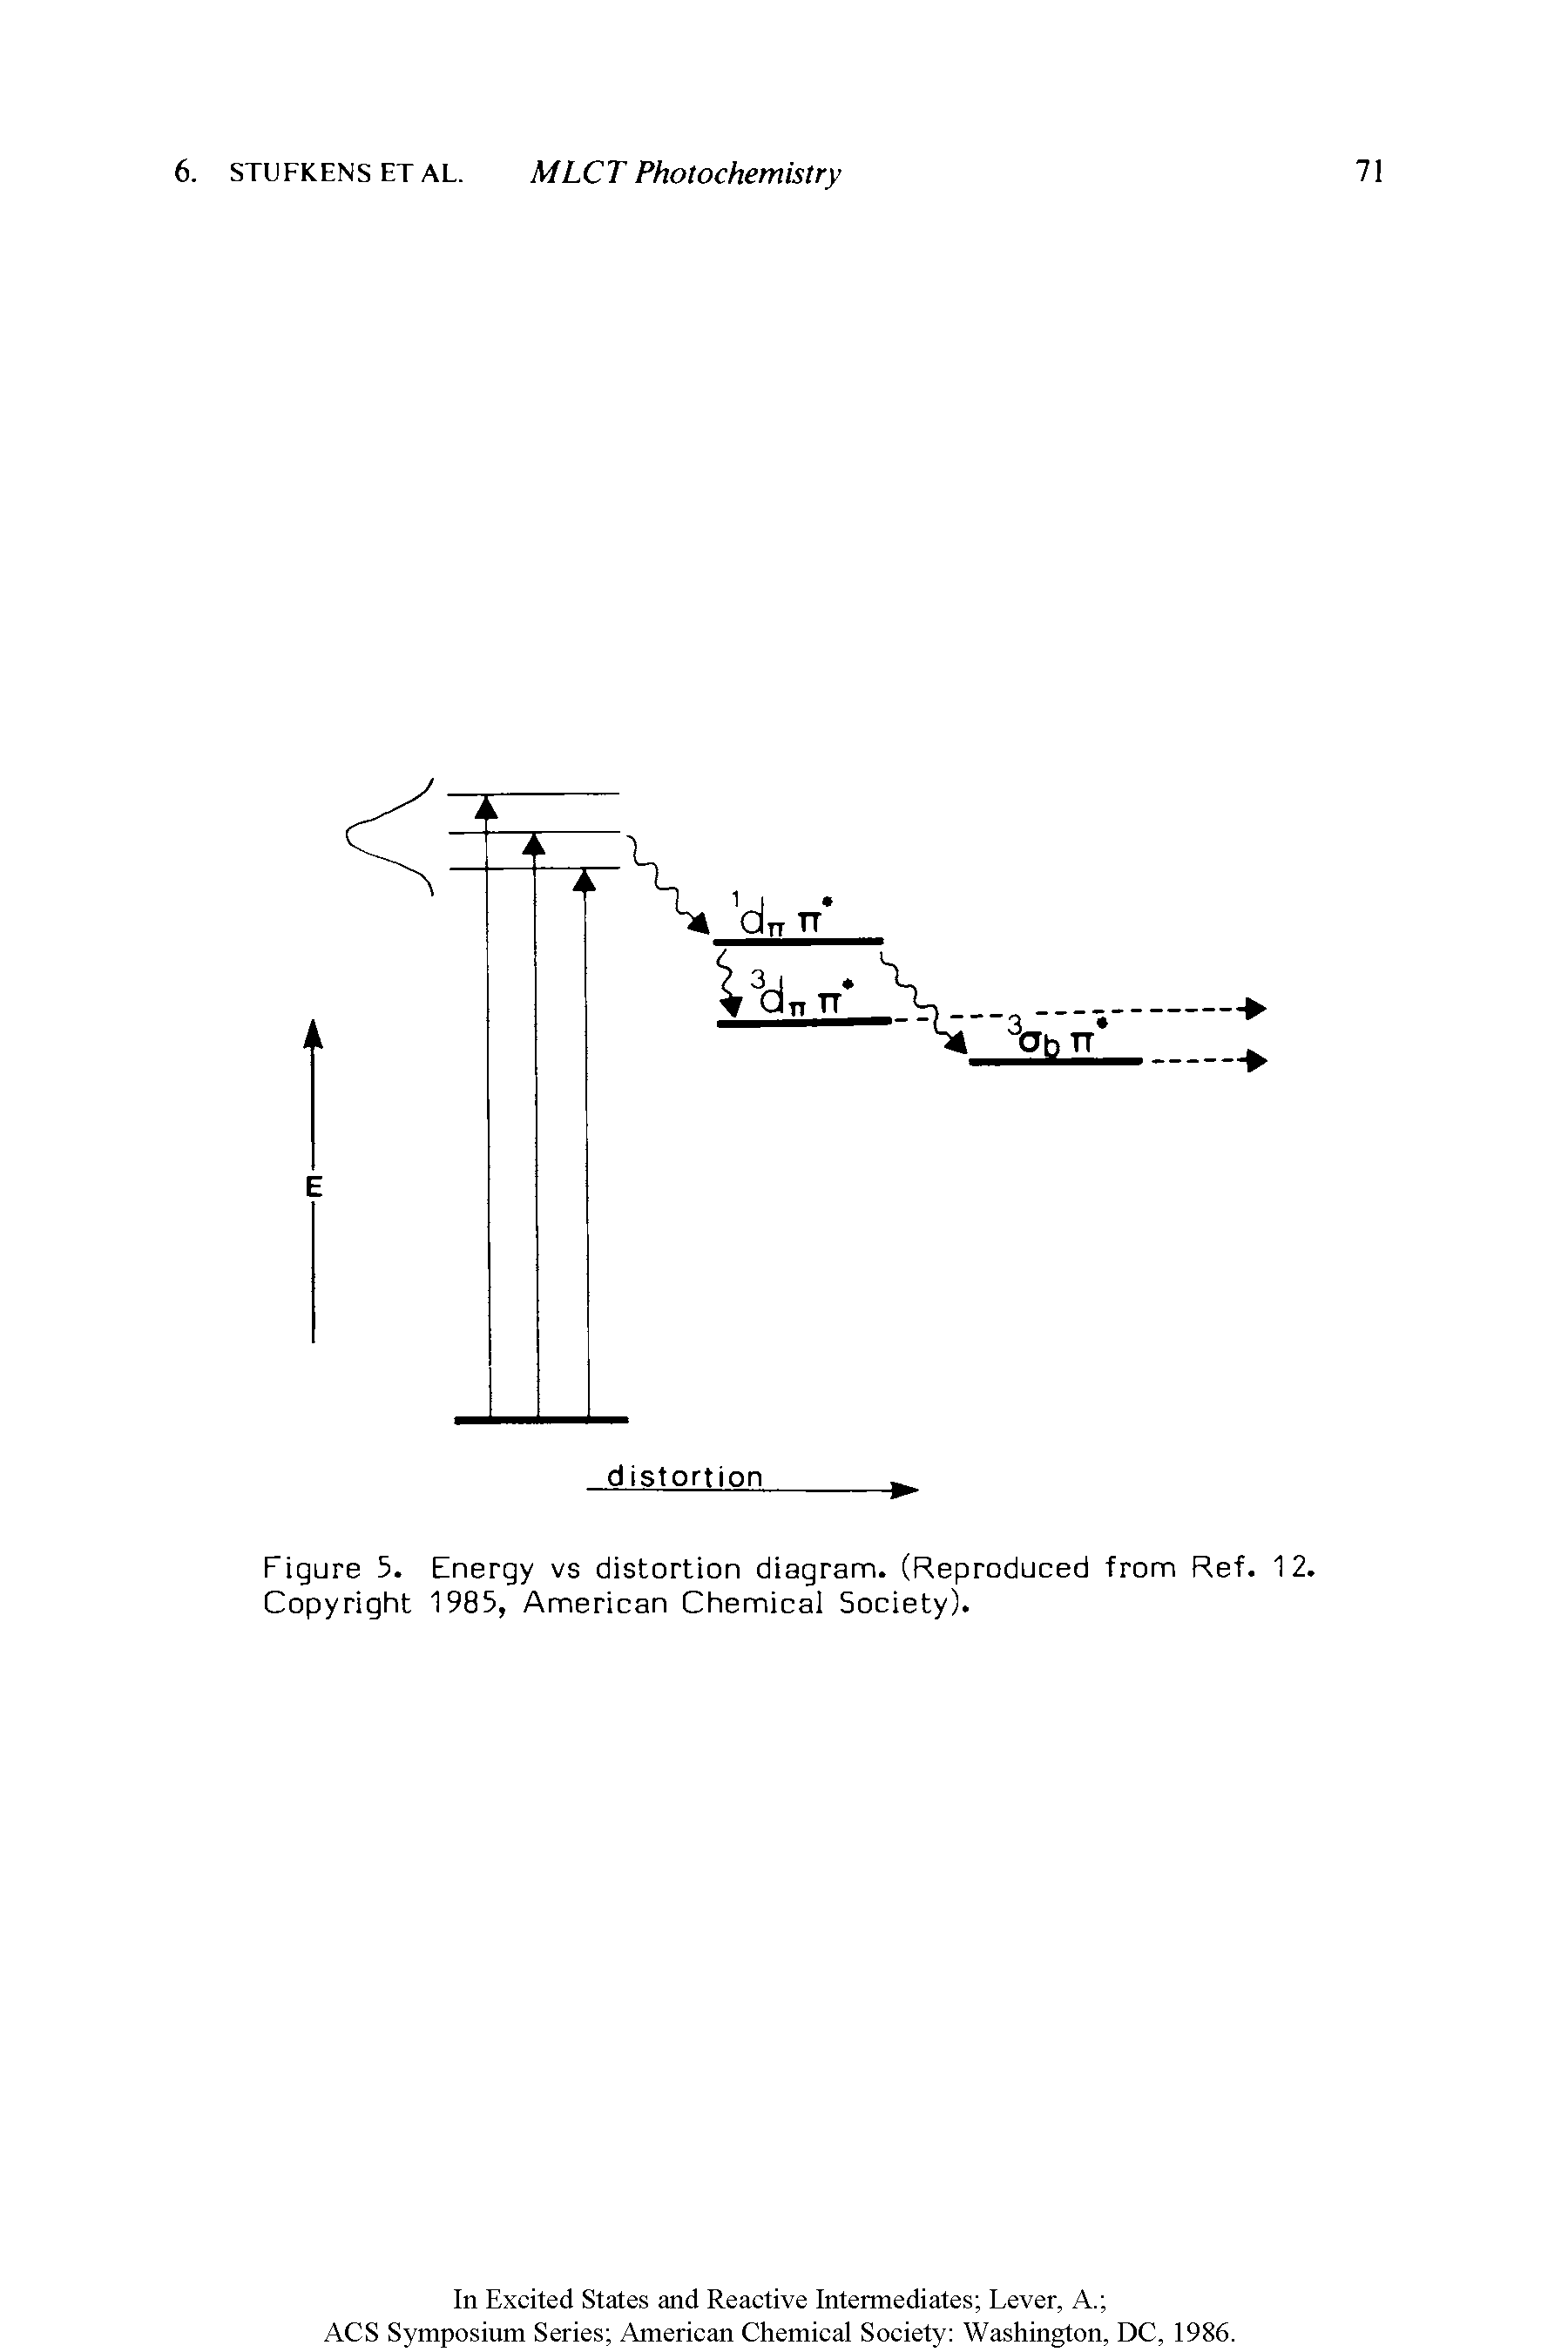 Figure 5. Energy vs distortion diagram. (Reproduced from Ref. 12. Copyright 1985, American Chemical Society).